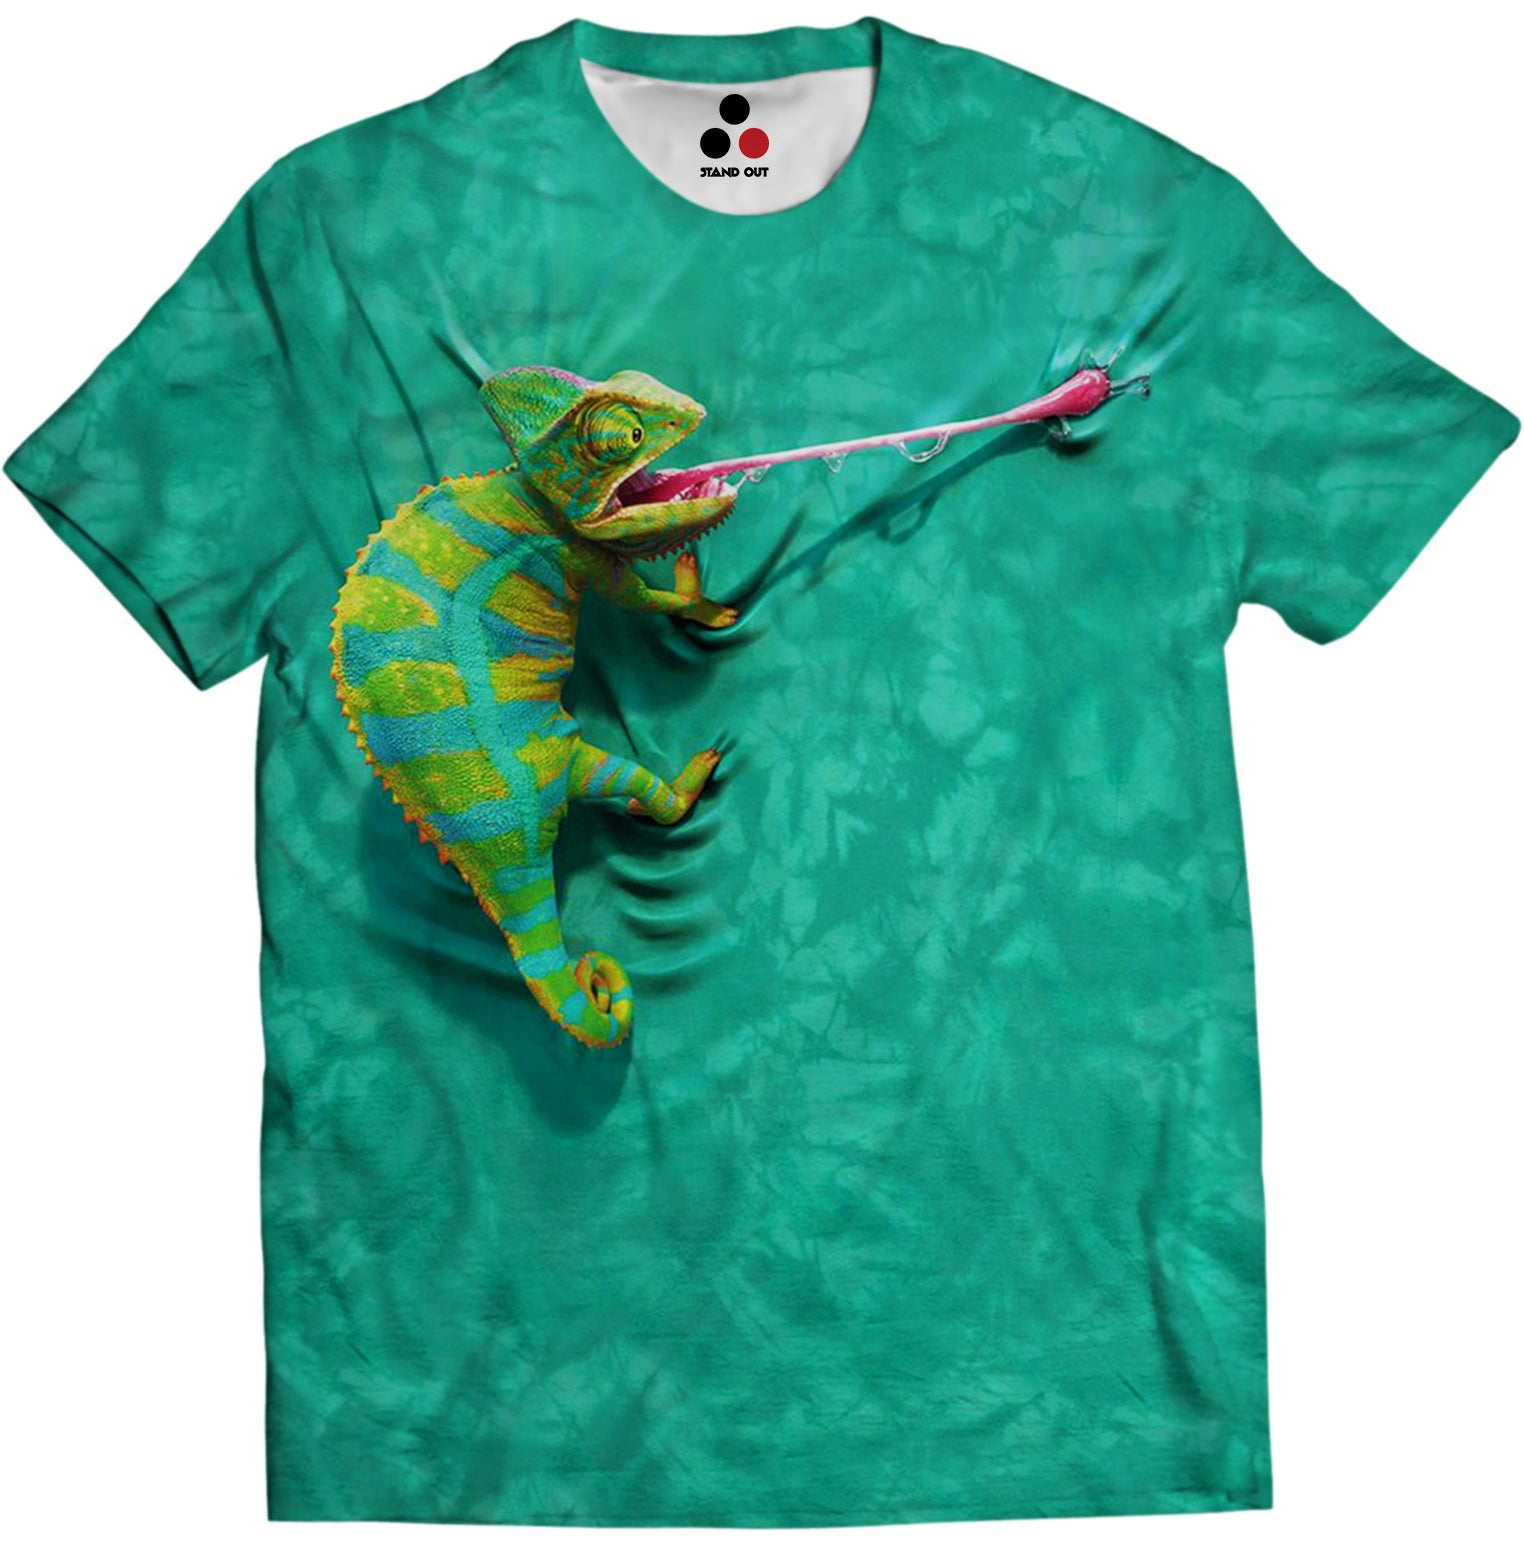 themountain.com stand out all over print chameleon t shirt reptile pets cold blooded hyperrealistic art inspired from the mountain t shirt usa standout Pitbull t shirt dog t shirt black t shirt dry fit t shirt pet t shirt pet supply gifts animal print tshirt all over printed t shirt dog face t shirt peta bluecross